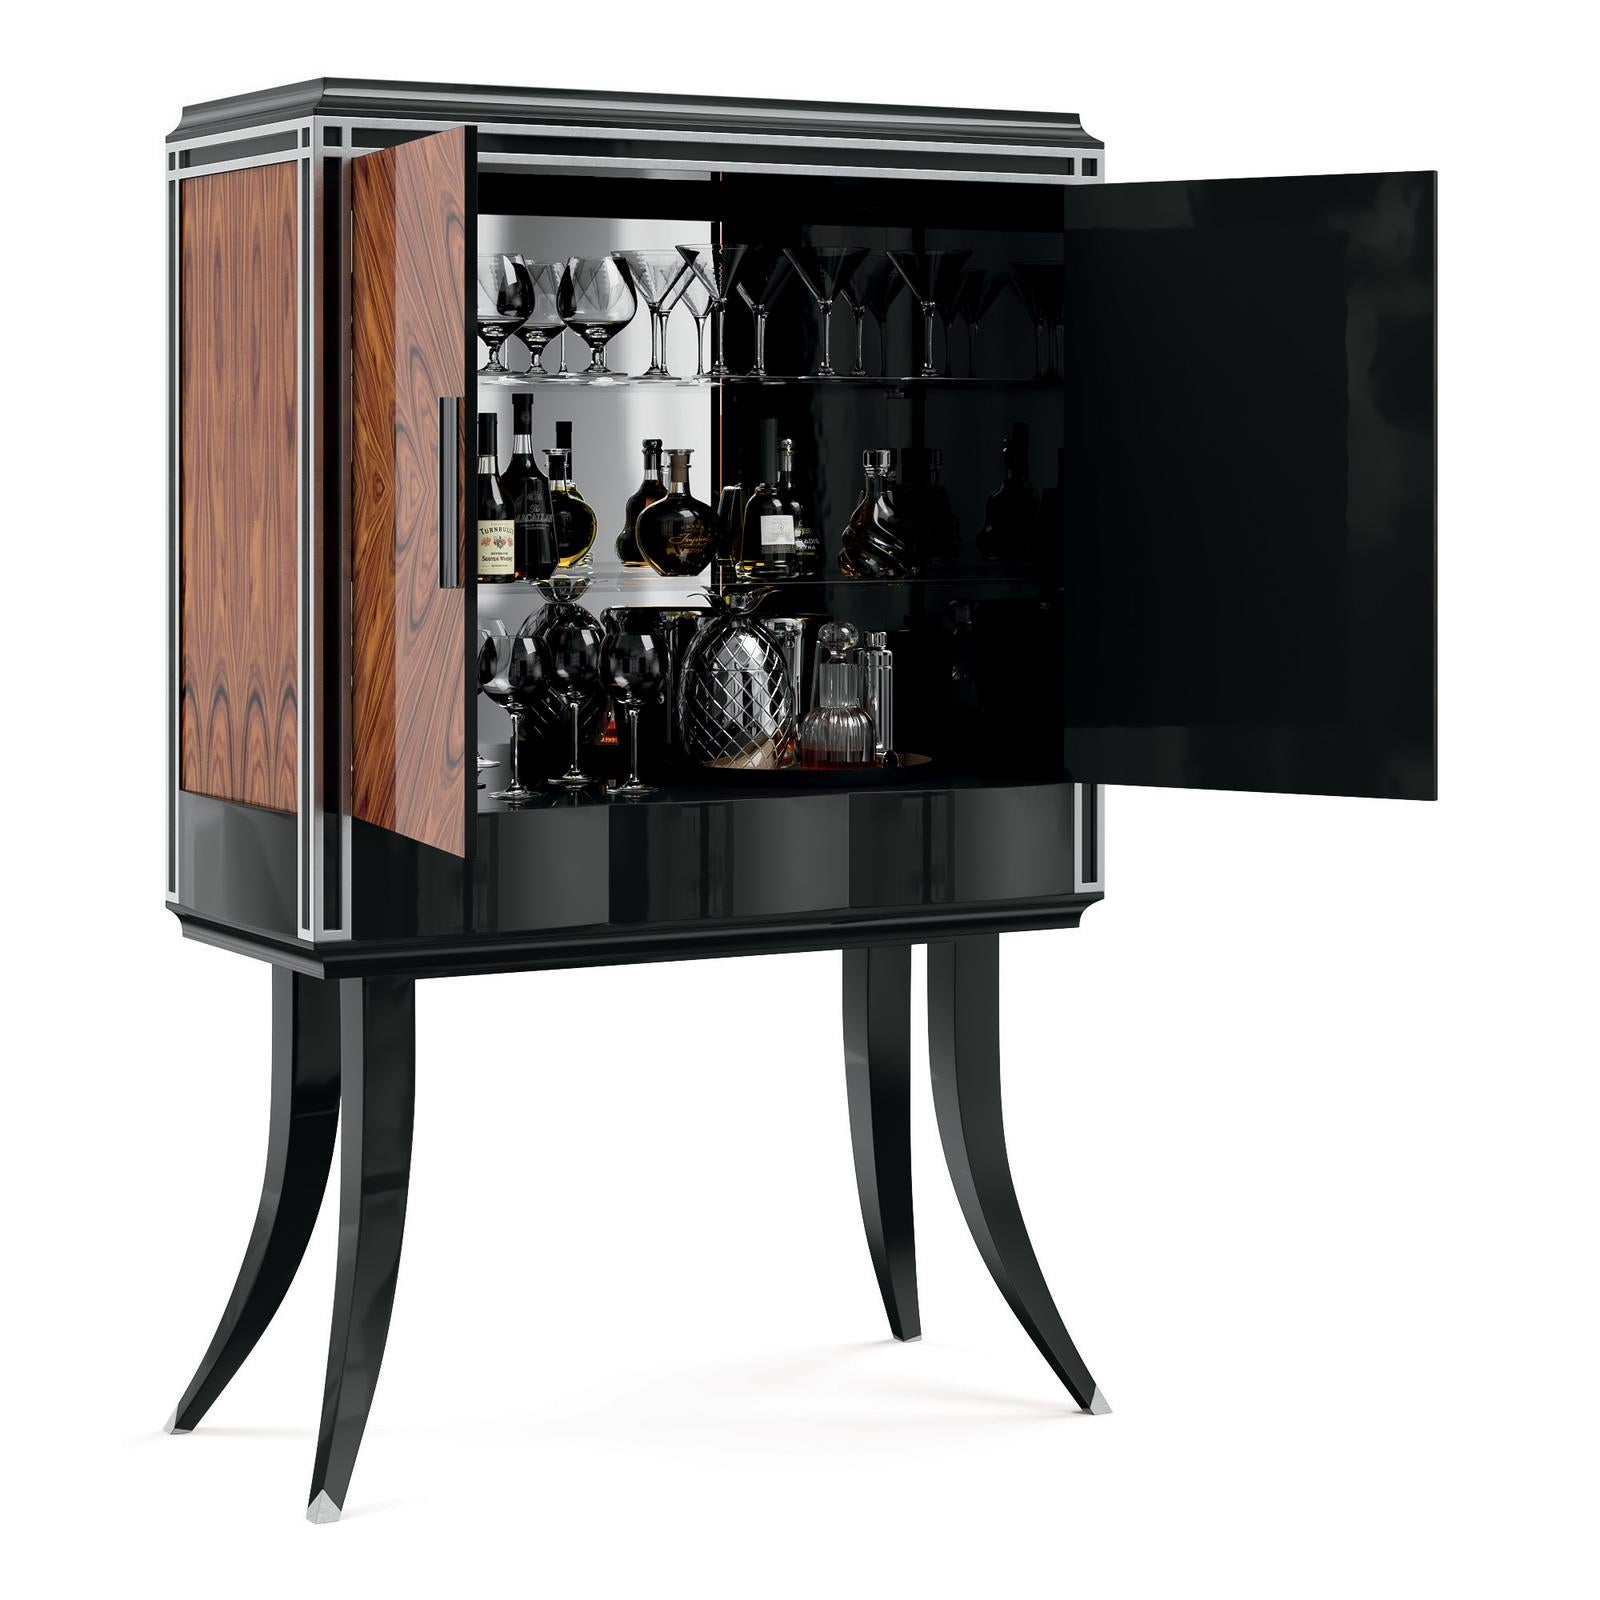 Part of the new refined Oscar collection, where tradition and modernity are expertly combined, this smart 2-door bar features an attractive design, adapting to settings with an exceptionally contemporary and cosmopolitan flavor. Sophisticated